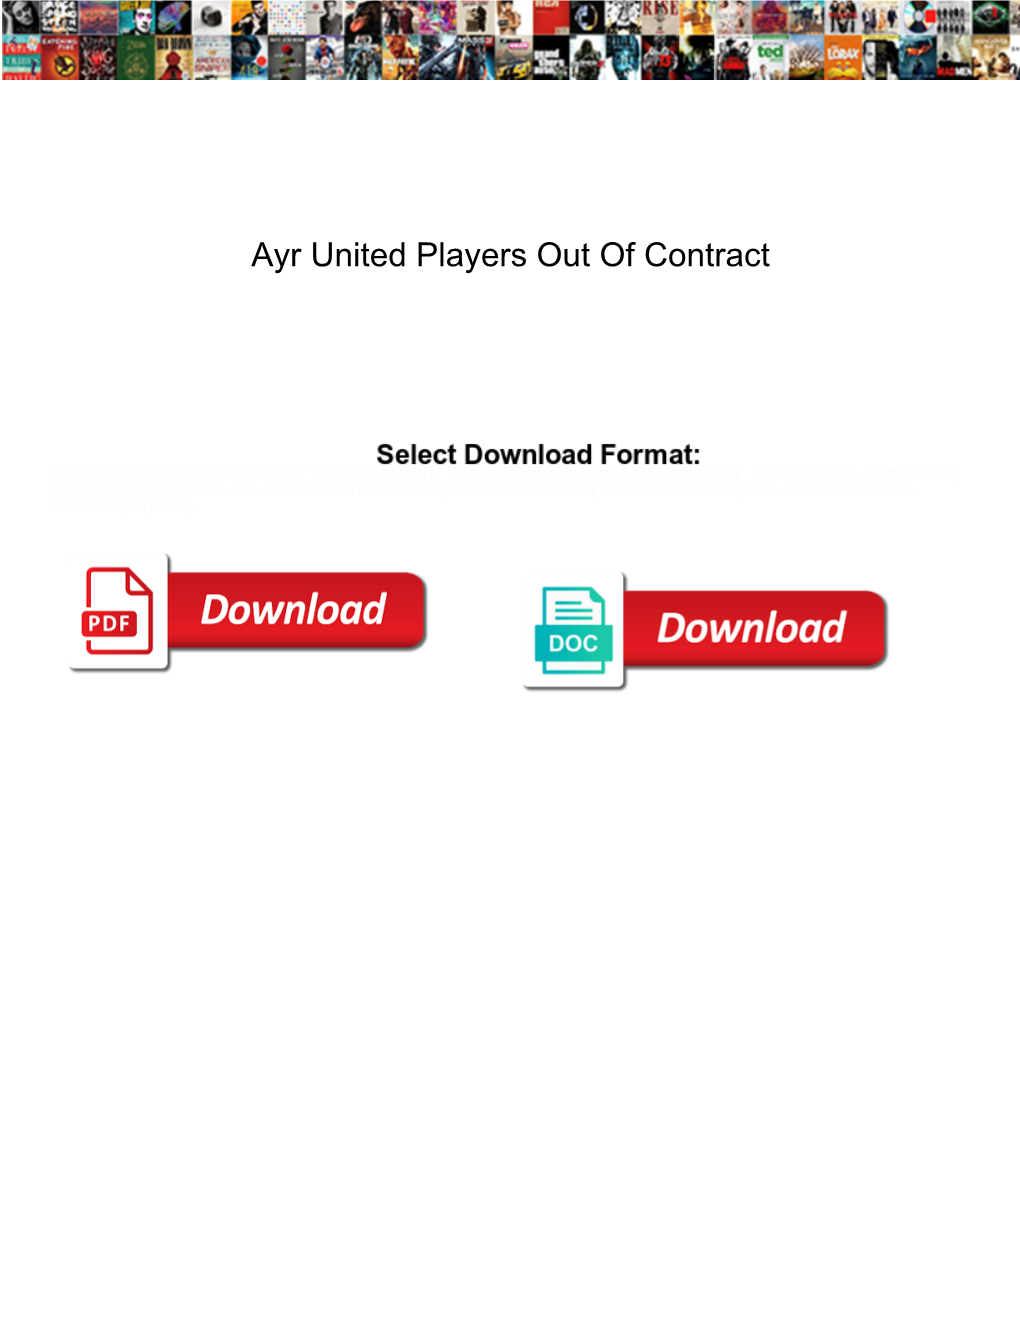 Ayr United Players out of Contract